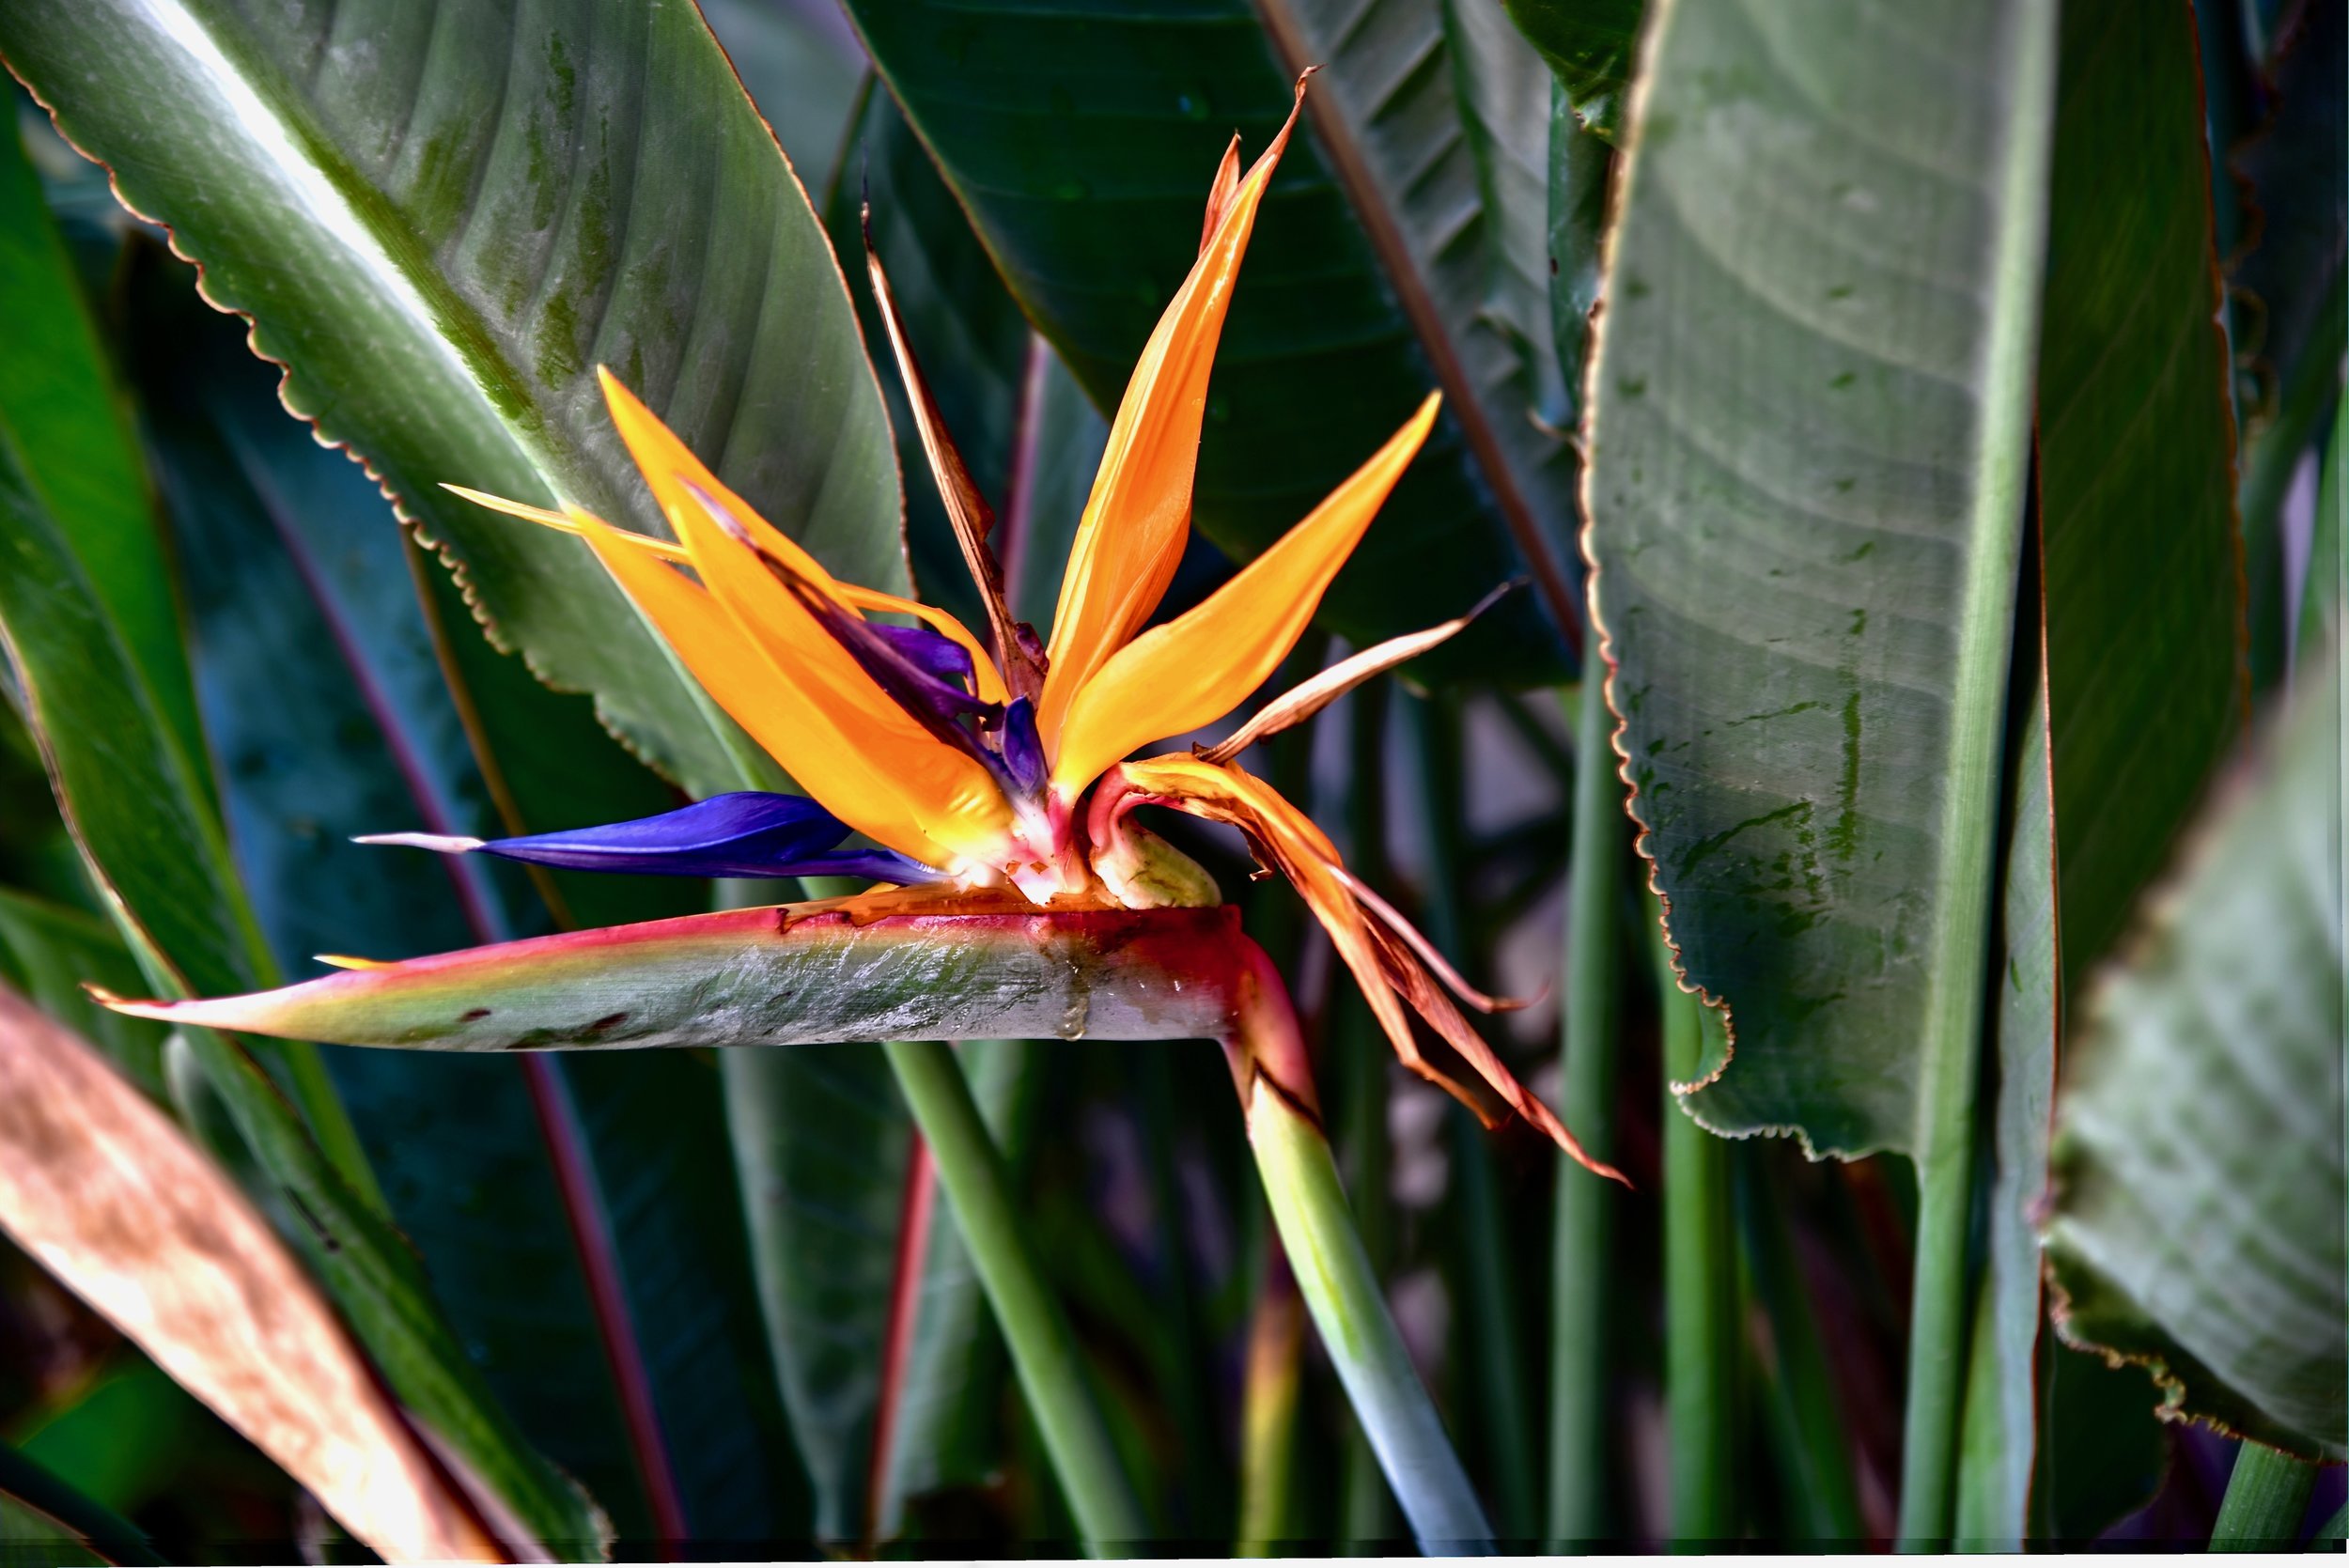 Bird of Paradise flowers by the pool.